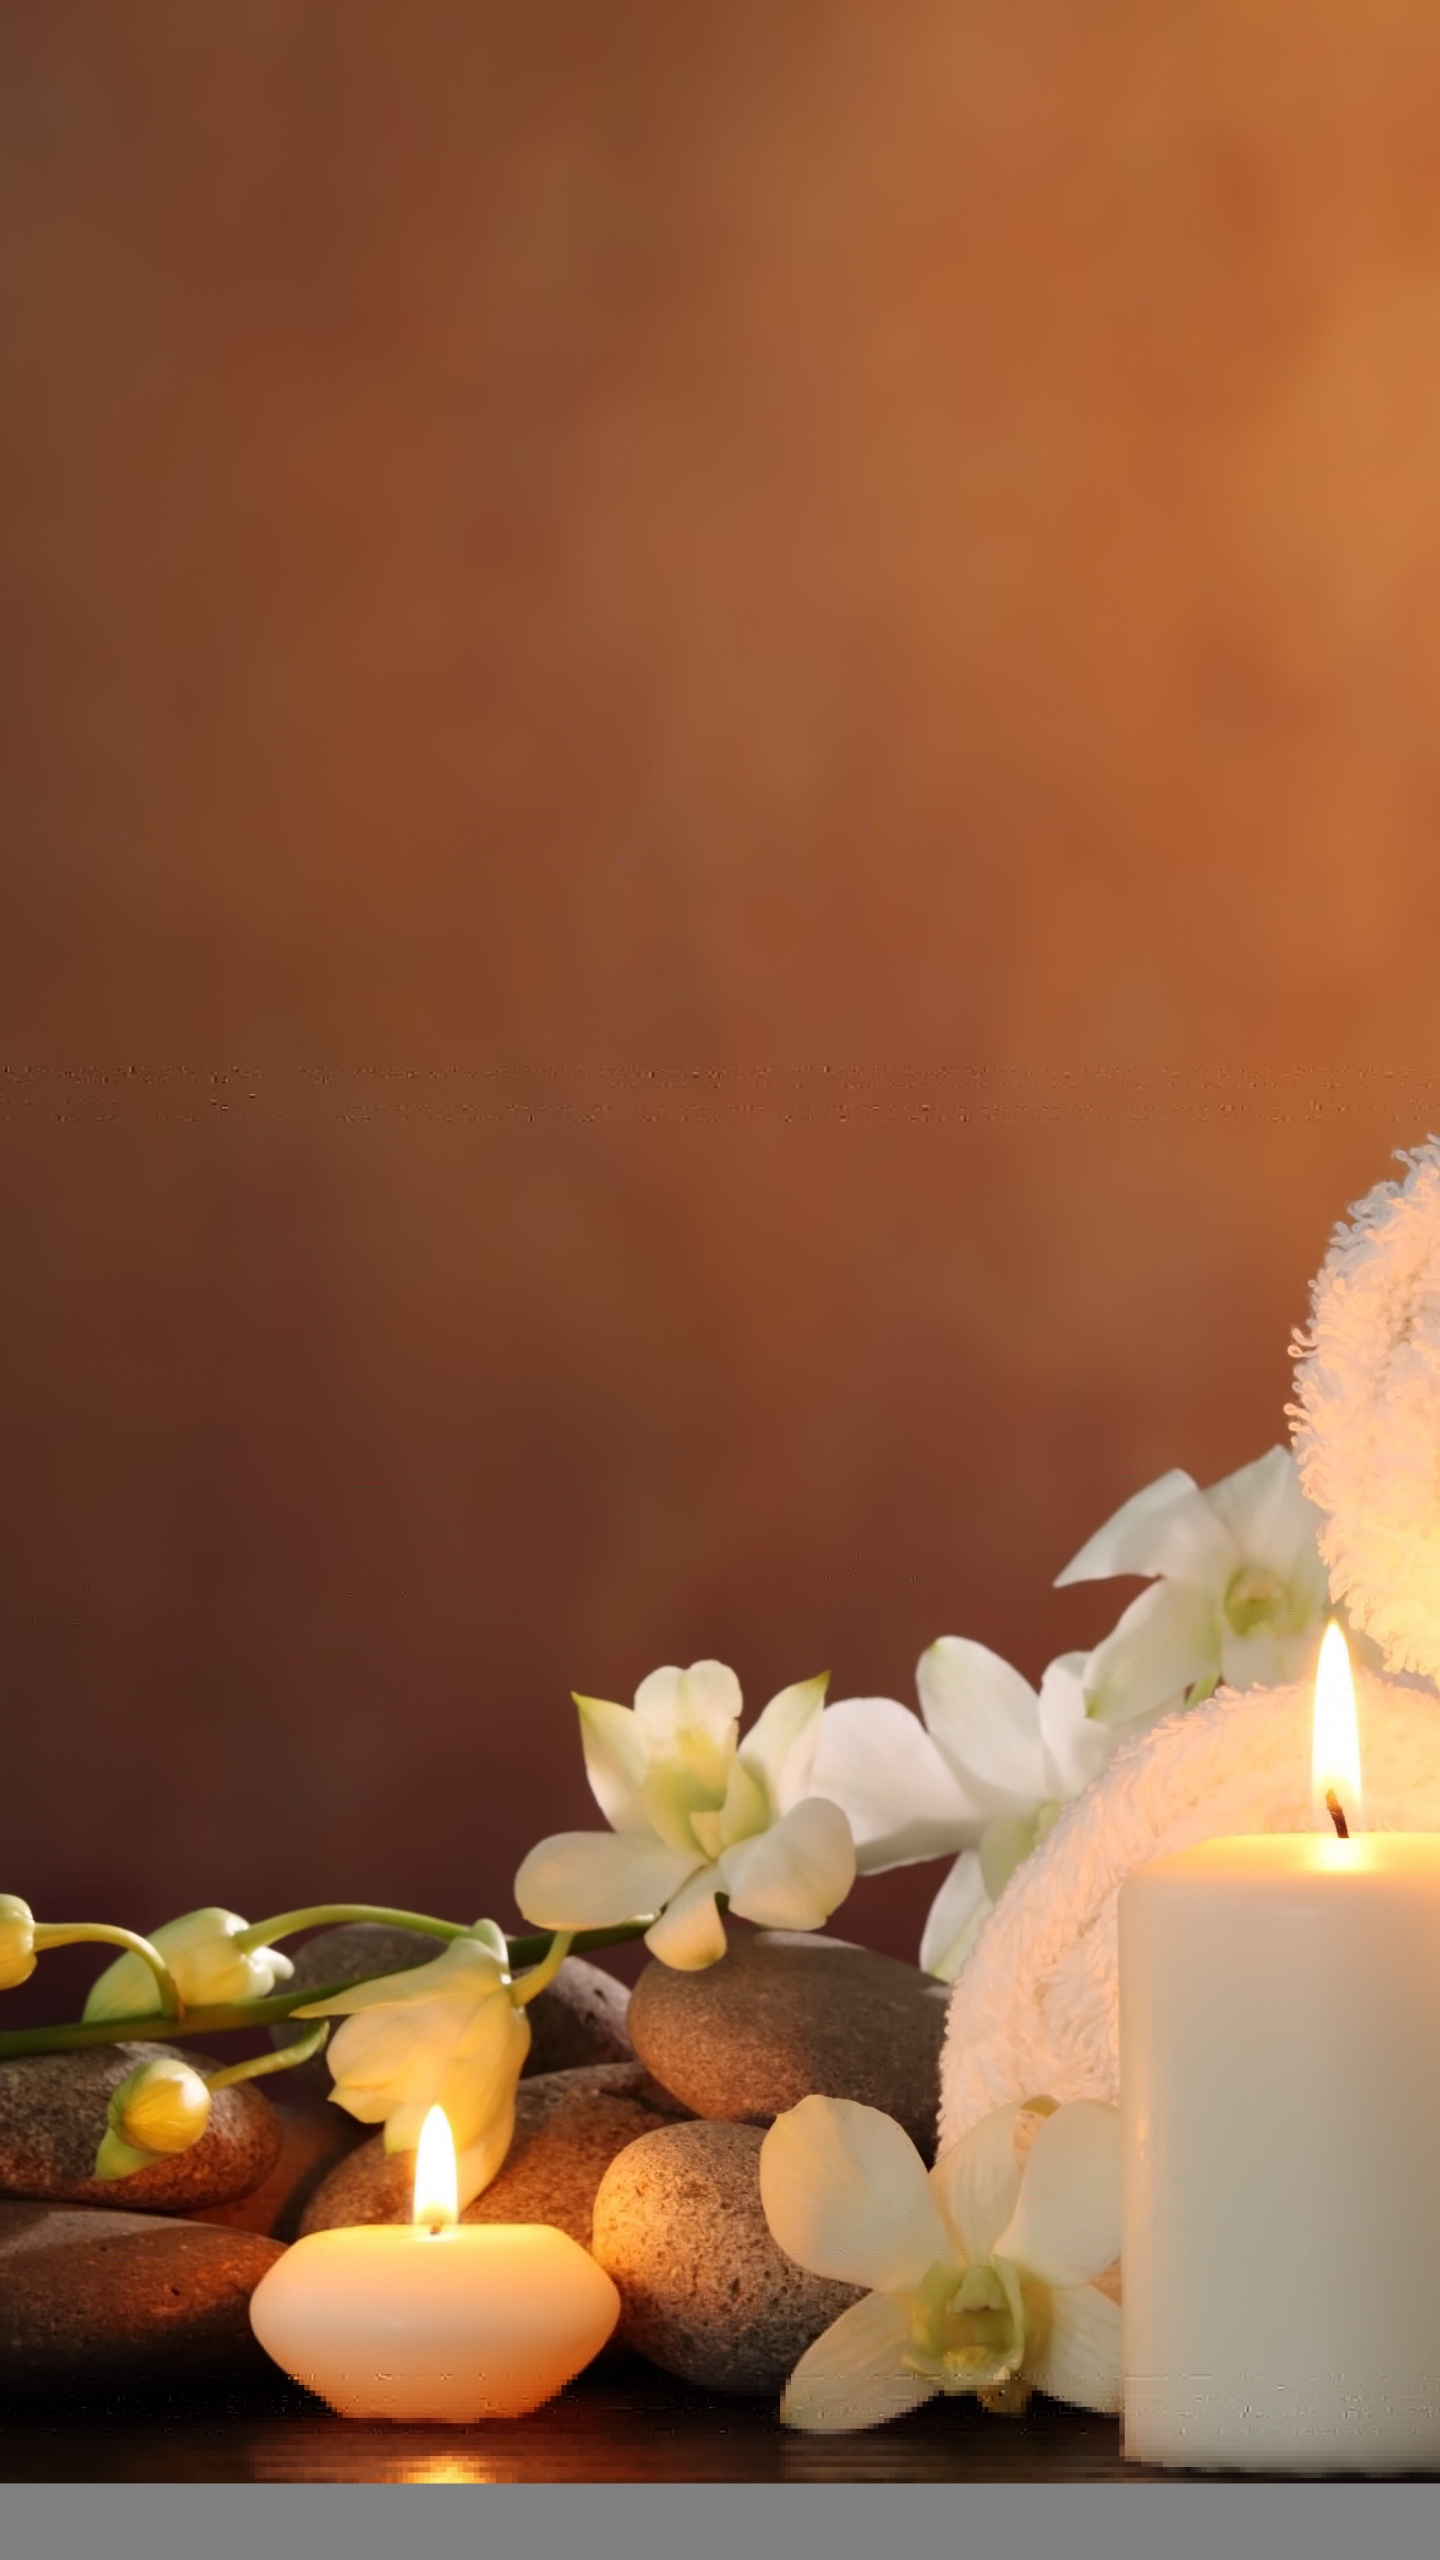 Wallpaper Spa Spa Stones Candles Flowers White Orchid - Relaxing Massage , HD Wallpaper & Backgrounds